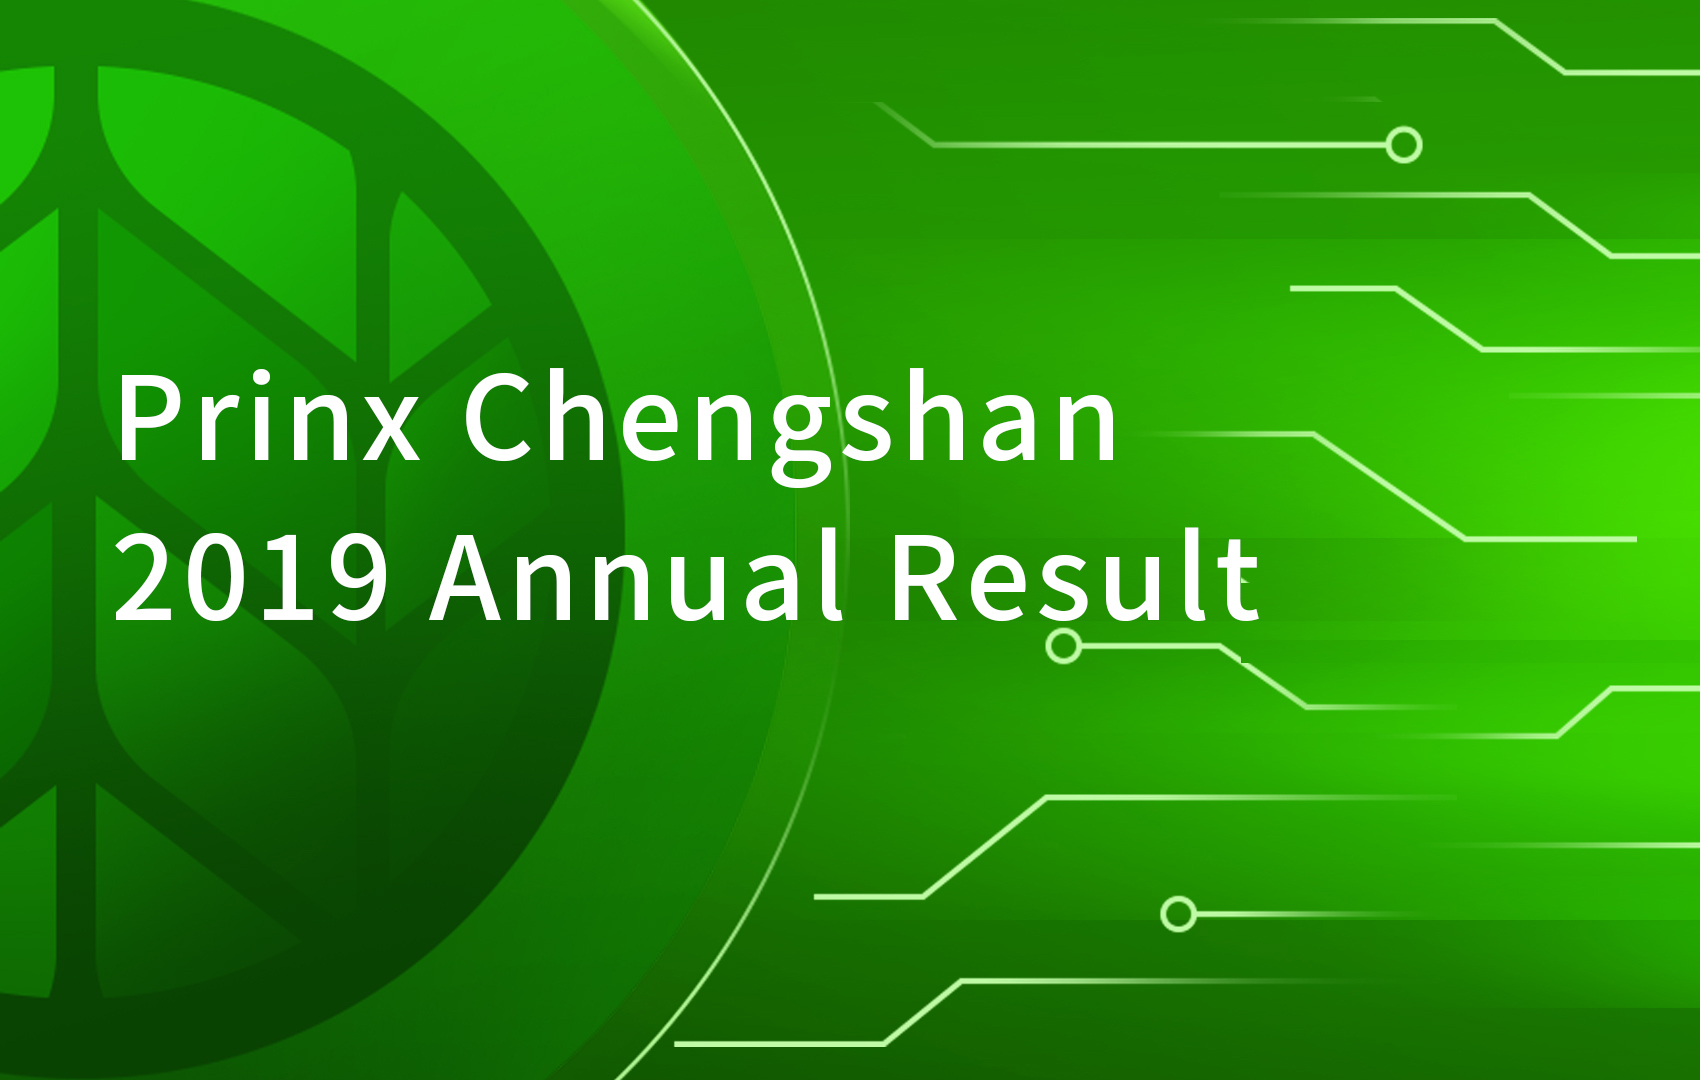 Prinx Chengshan Announces 2019 Annual Results